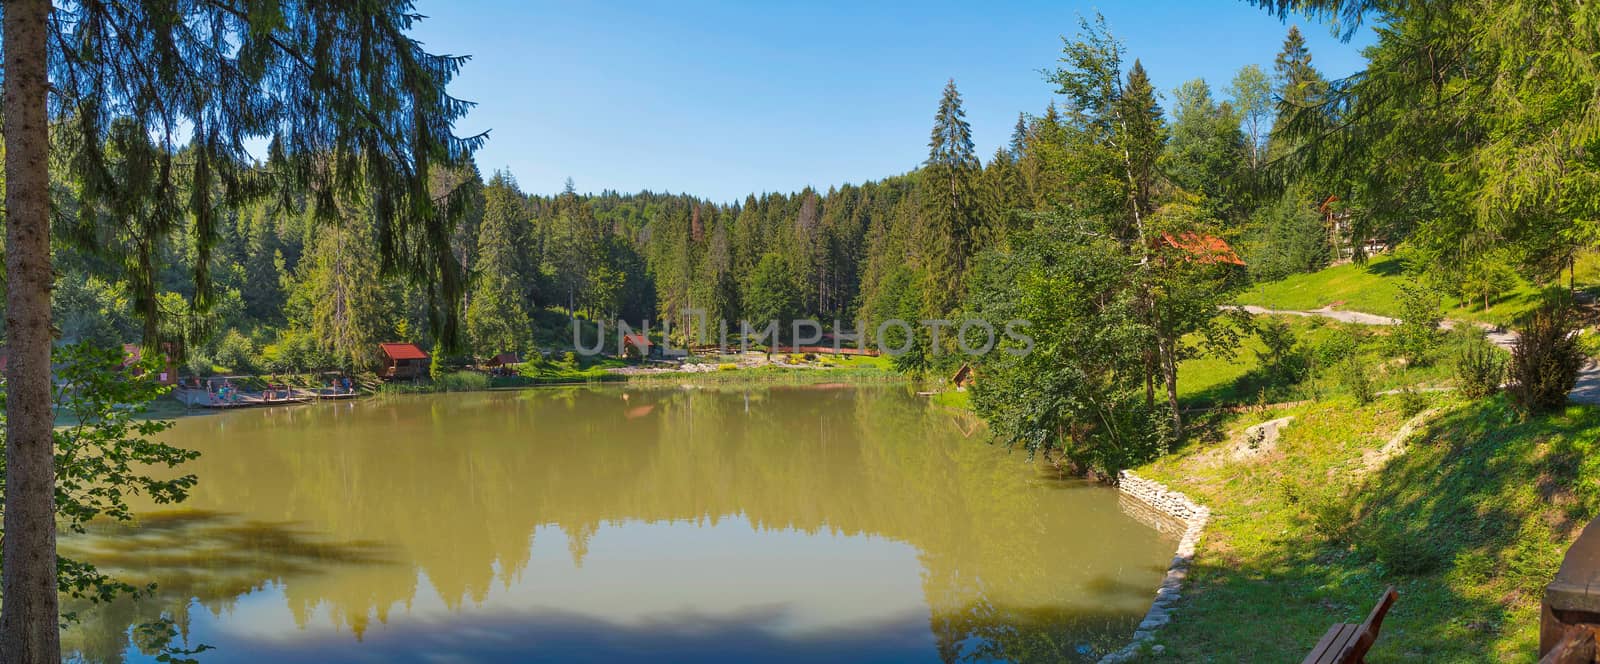 Green Lake in the middle of a large park area with houses and pl by Adamchuk